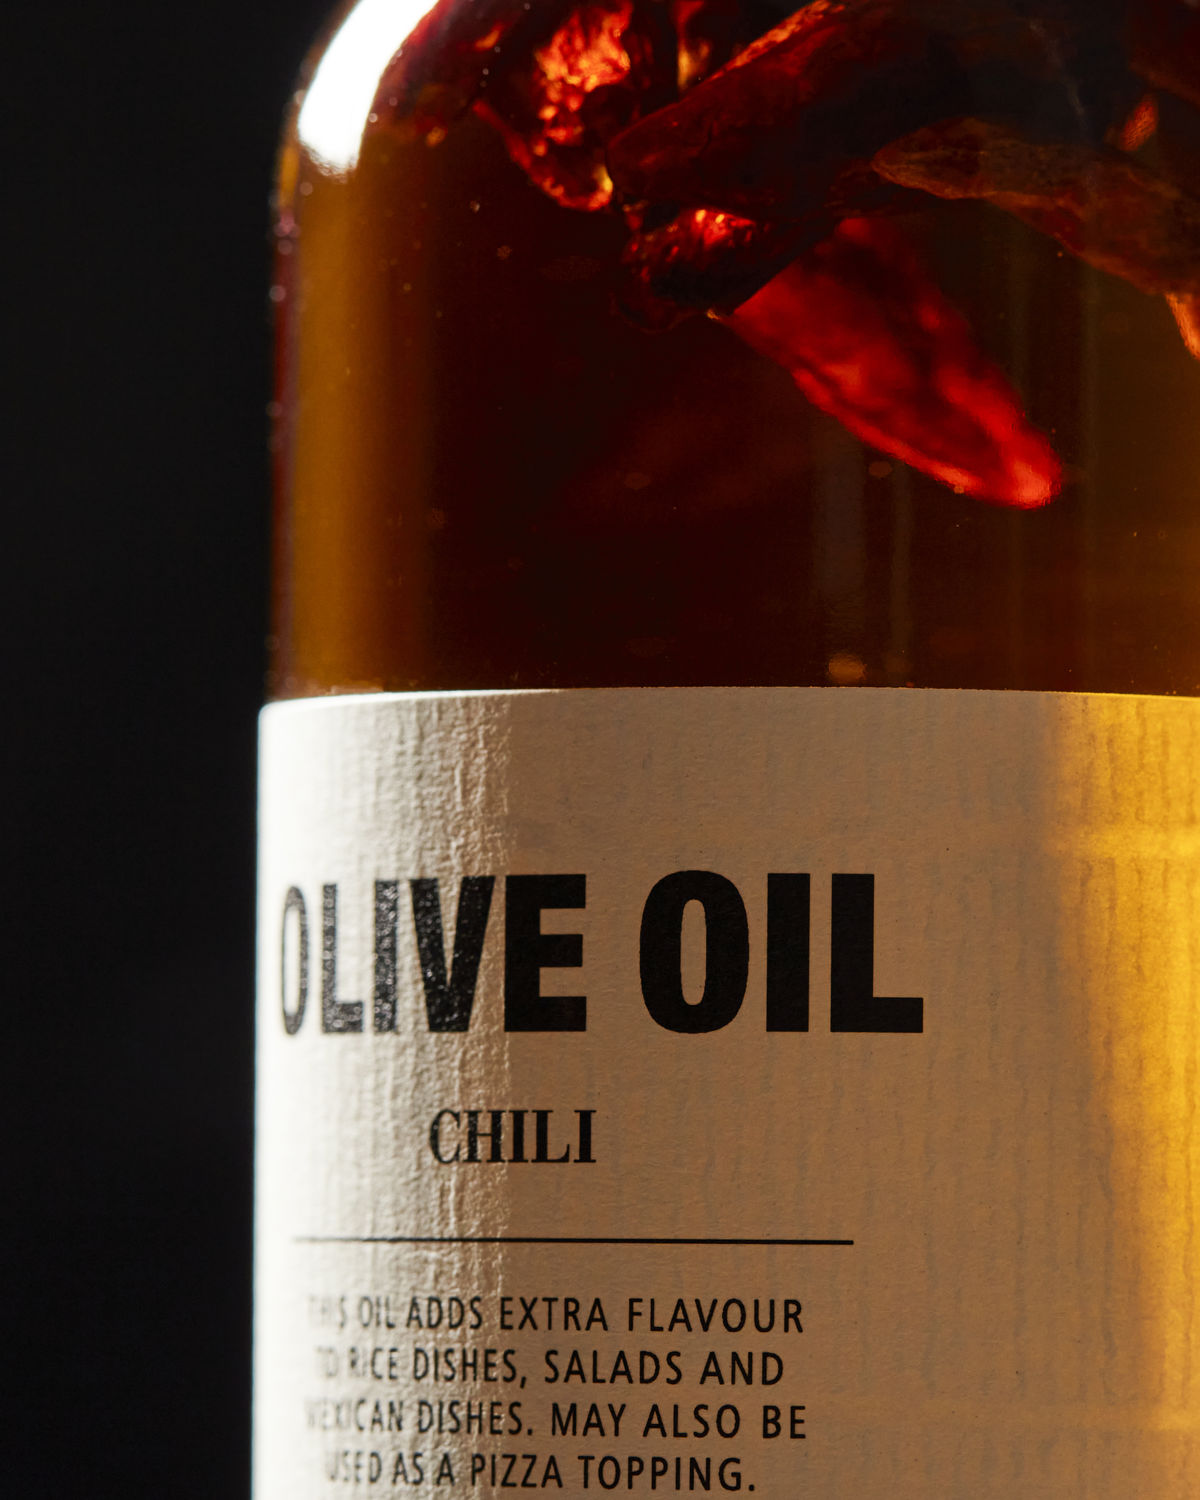 Olive oil with chilli, 25 cl.